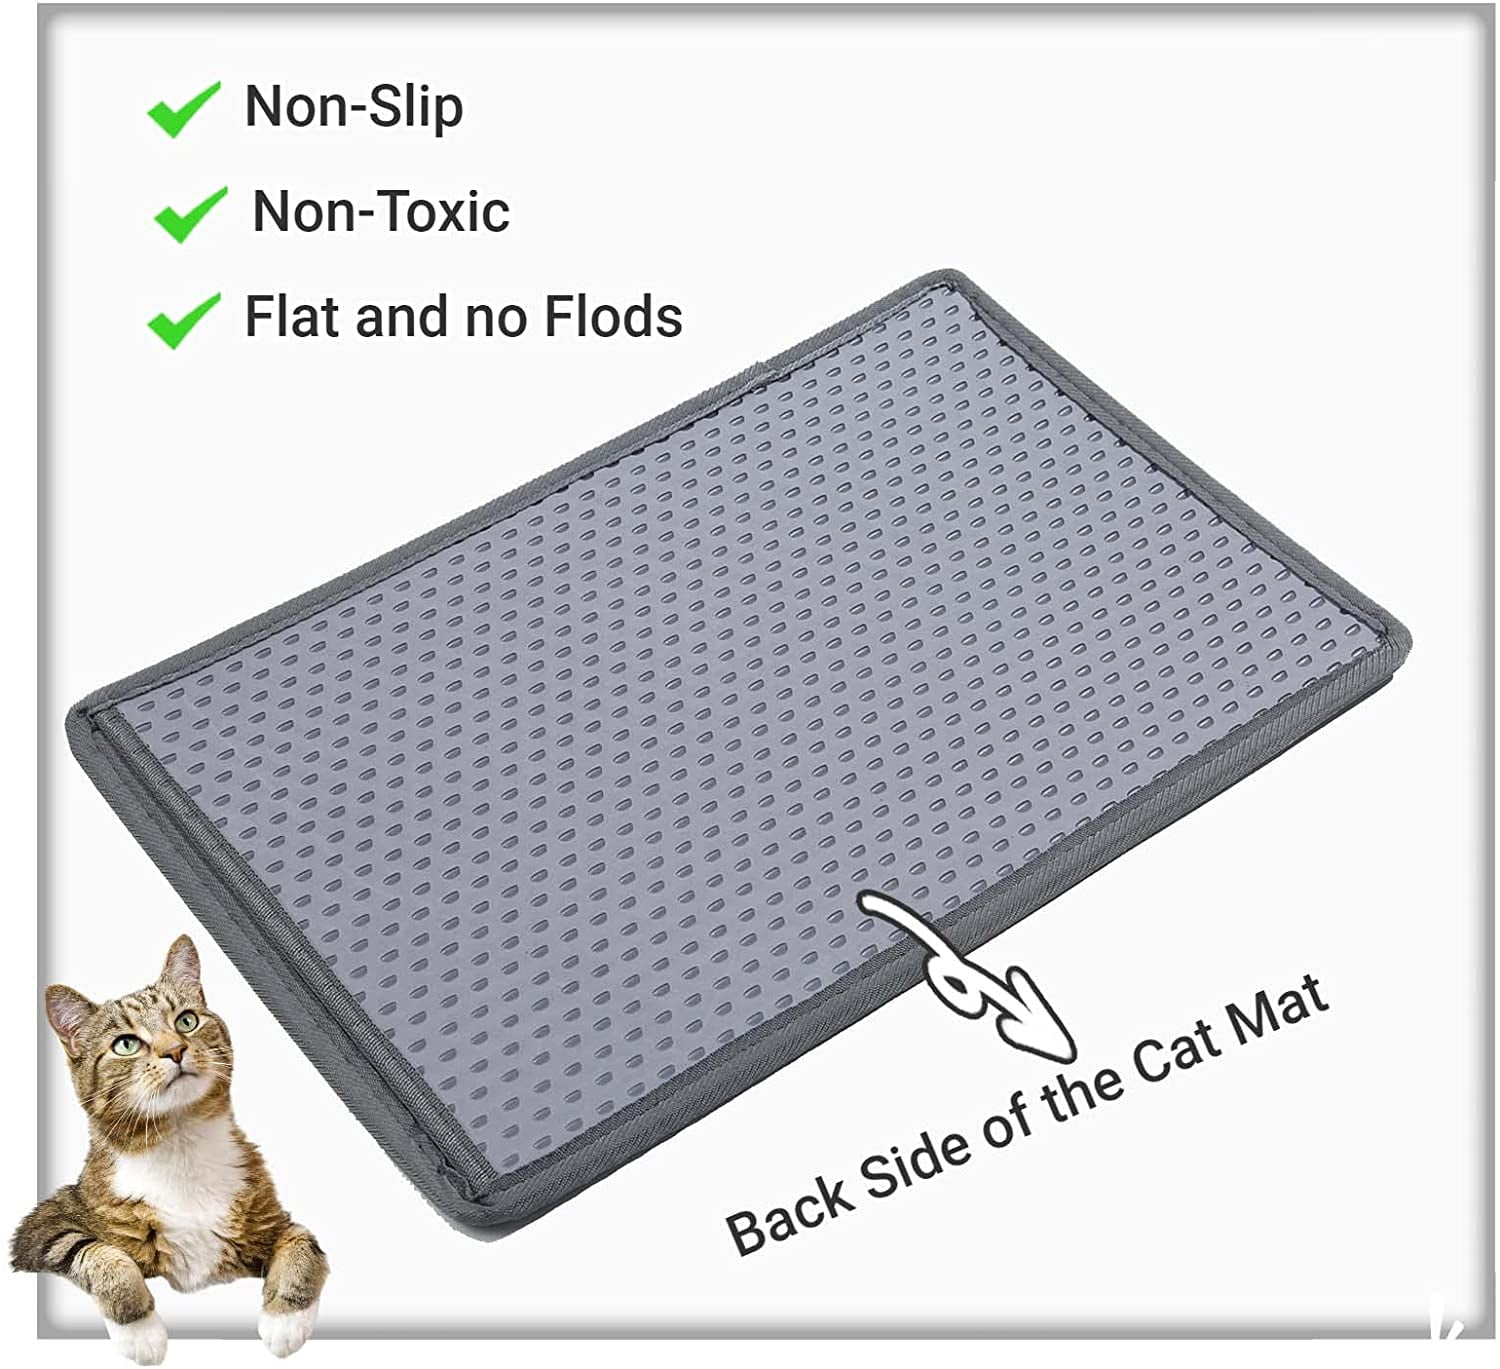  Gorilla Grip Honeycomb Cat Mat, Traps Litter, Two Layer  Trapping Kitty Mats, Less Waste, Soft On Paws, Indoor Box Supplies and  Essentials, Feeding Trap, Water Resistant on Floors, 30x24 Gray 